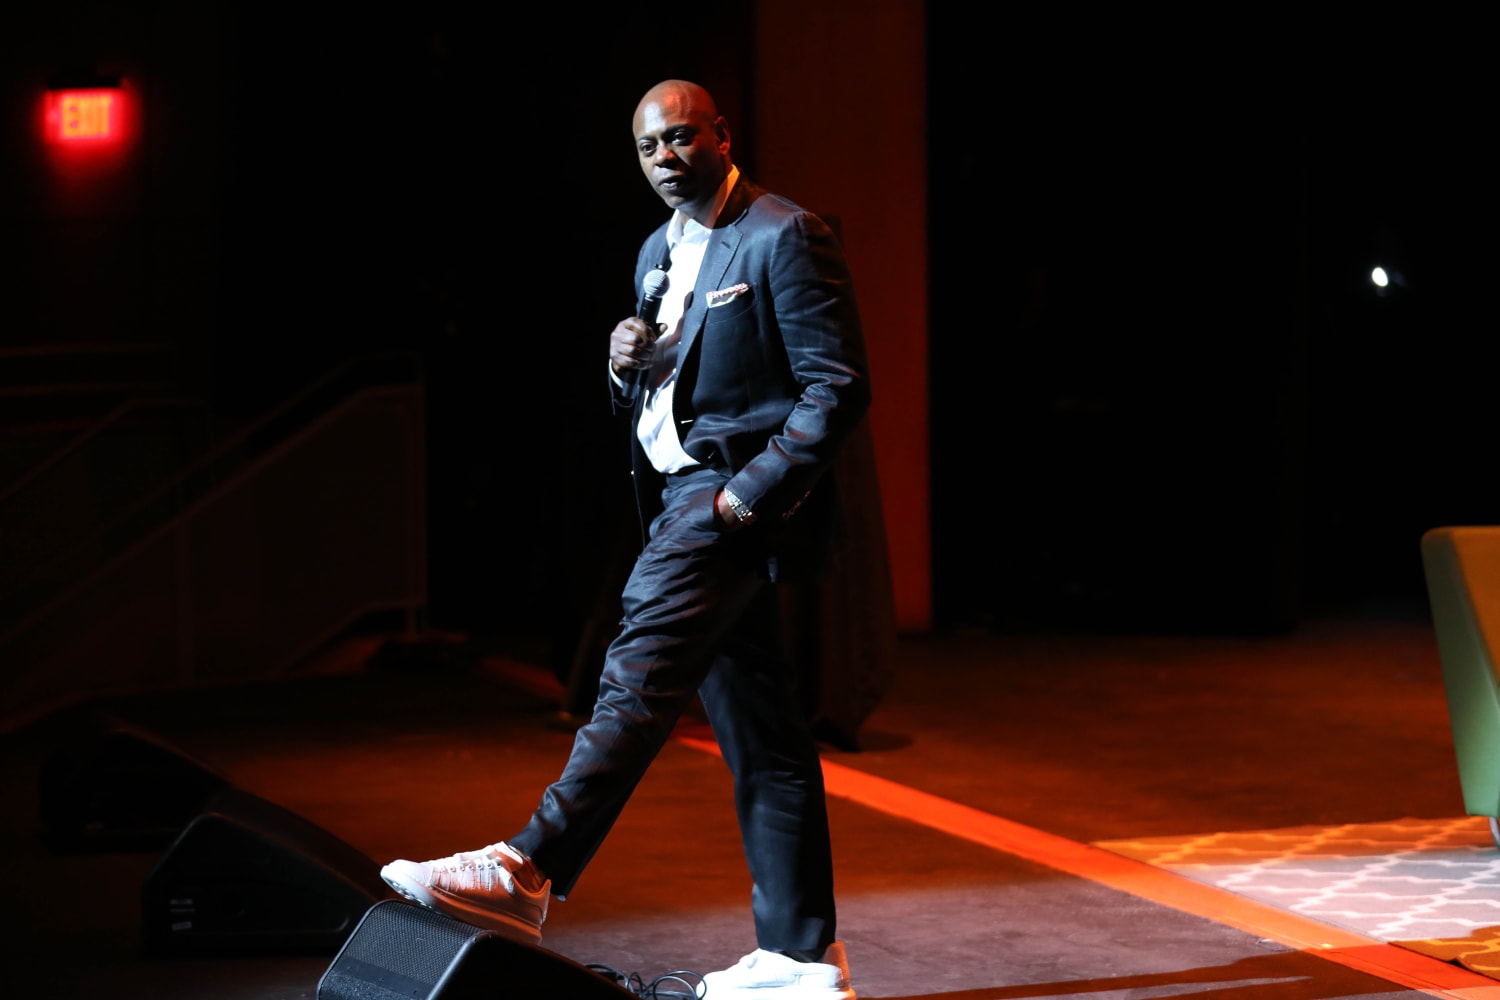 Dave Chappelle show at Minneapolis’ First Avenue canceled after online backlash